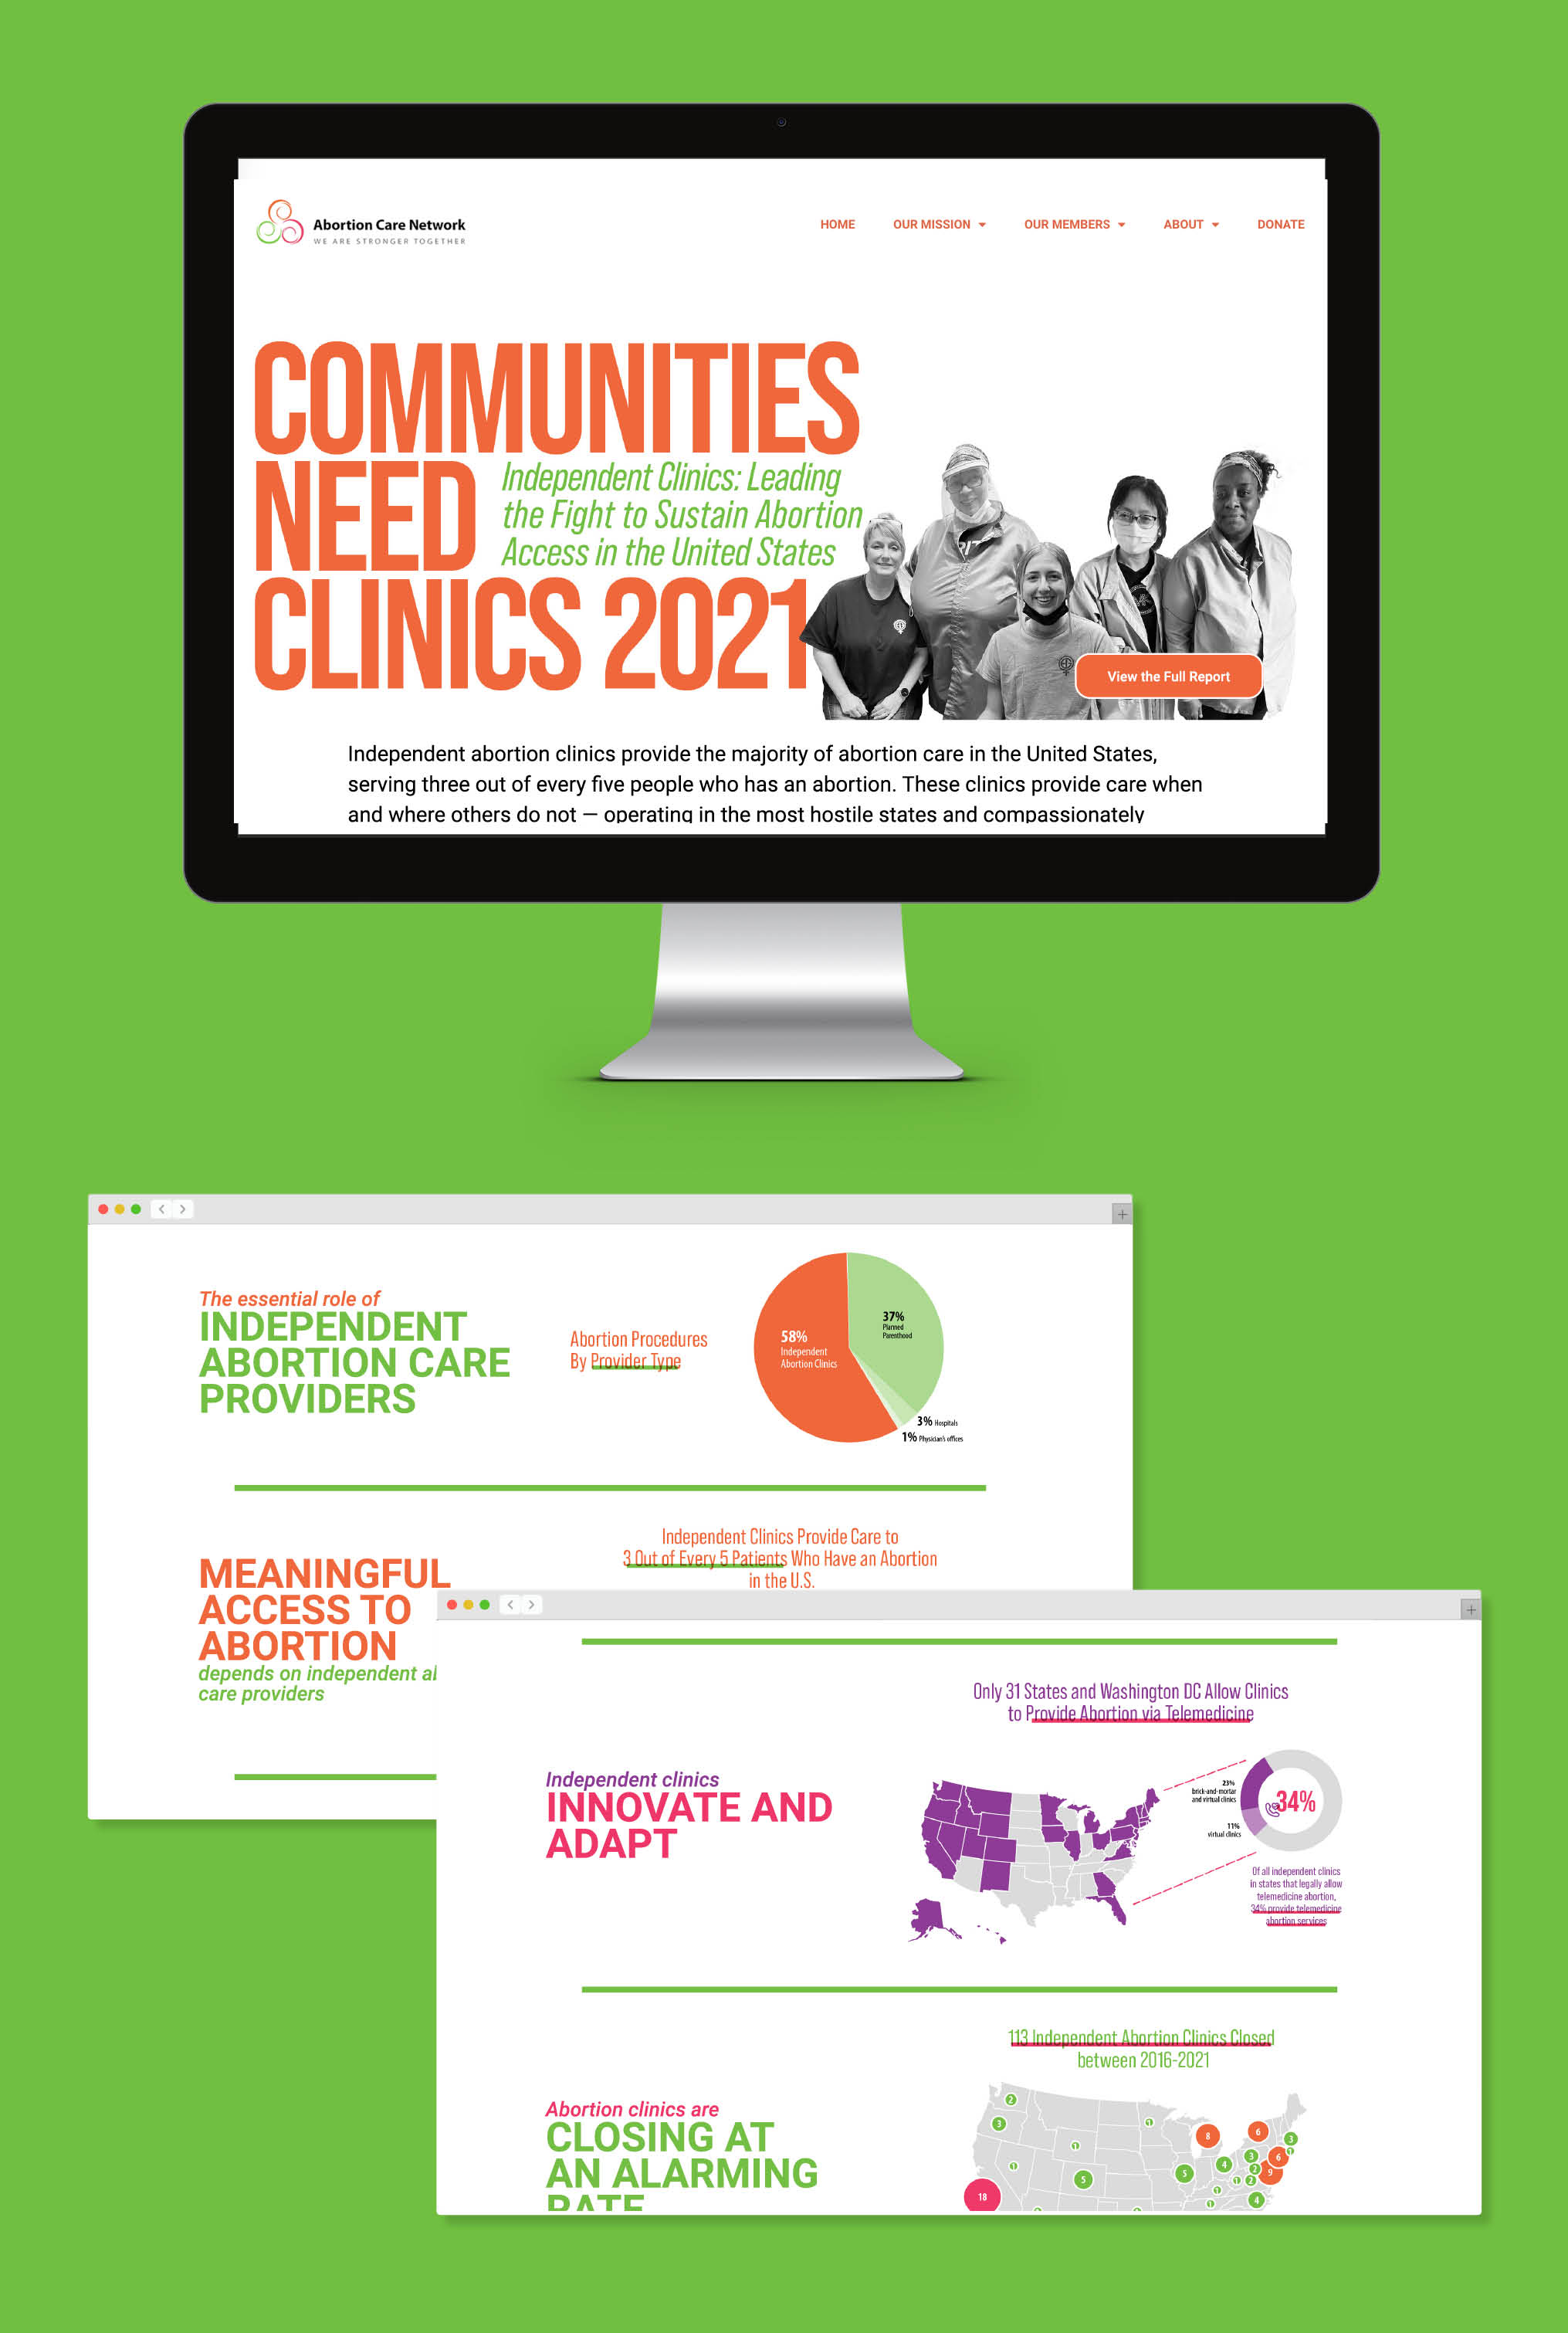 A desktop computer showing the landing page for the Communities Need Care report and two screen shots of sections from the page, showing data vizualizations about independent clinics and access to abortion care.